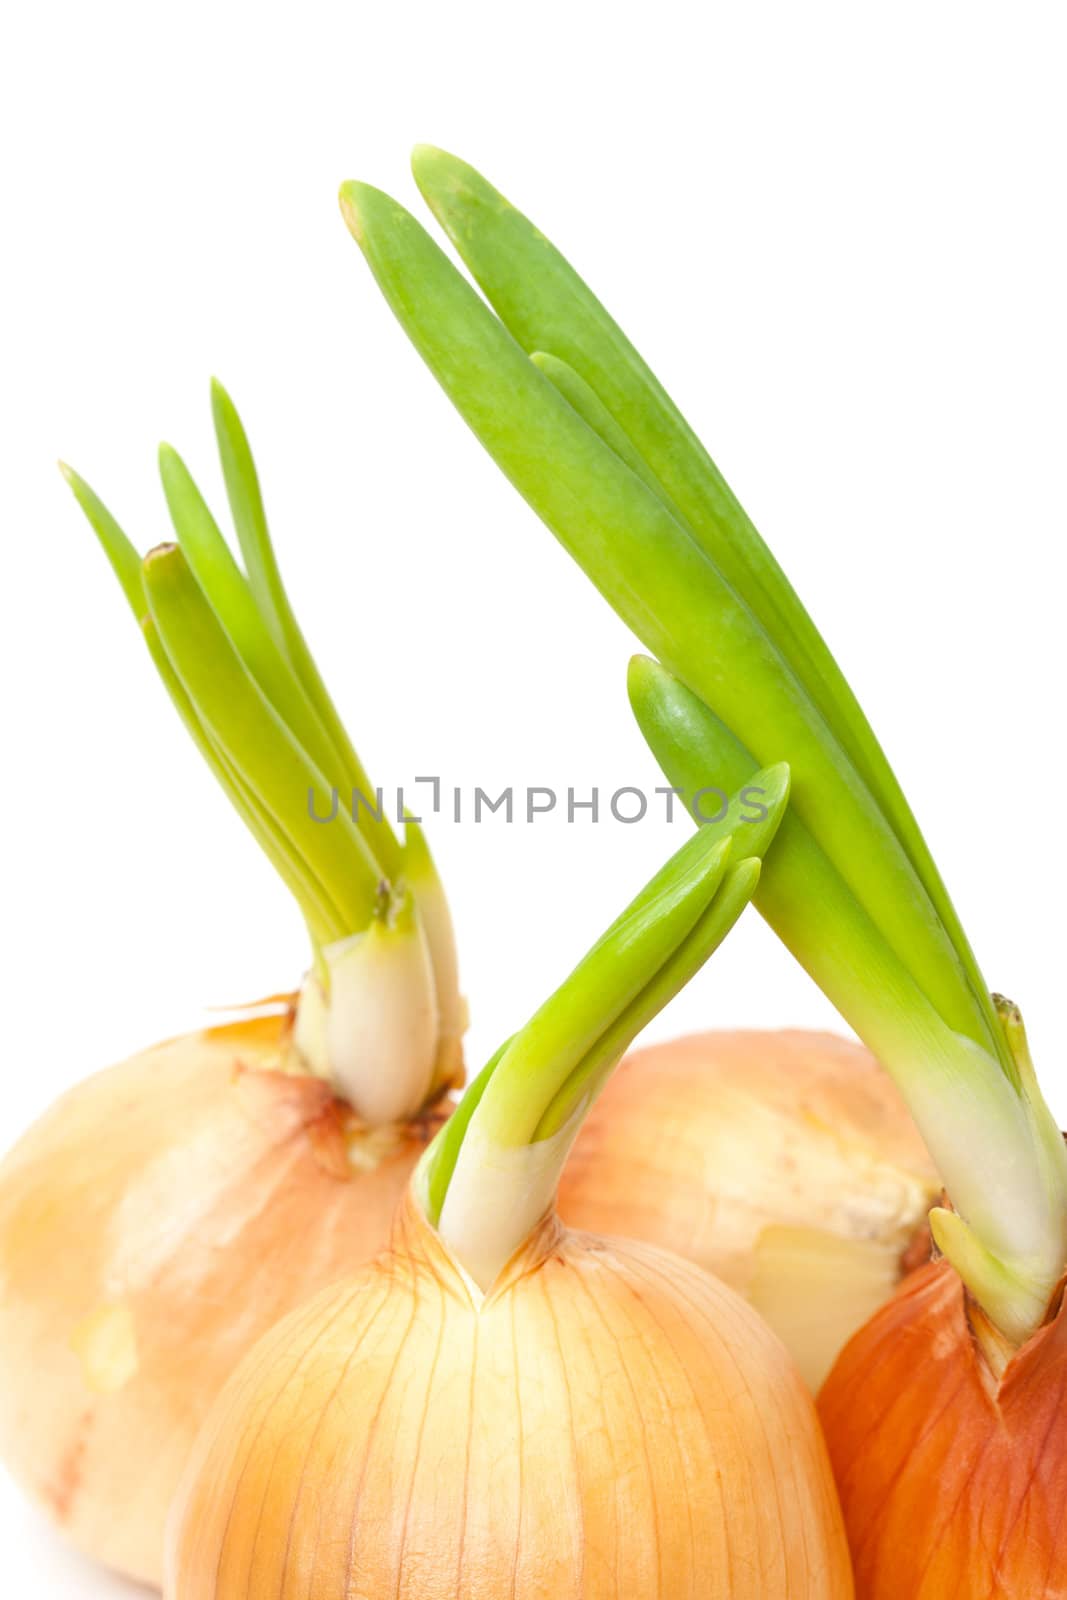 Sprouting Bulb Onions by Discovod